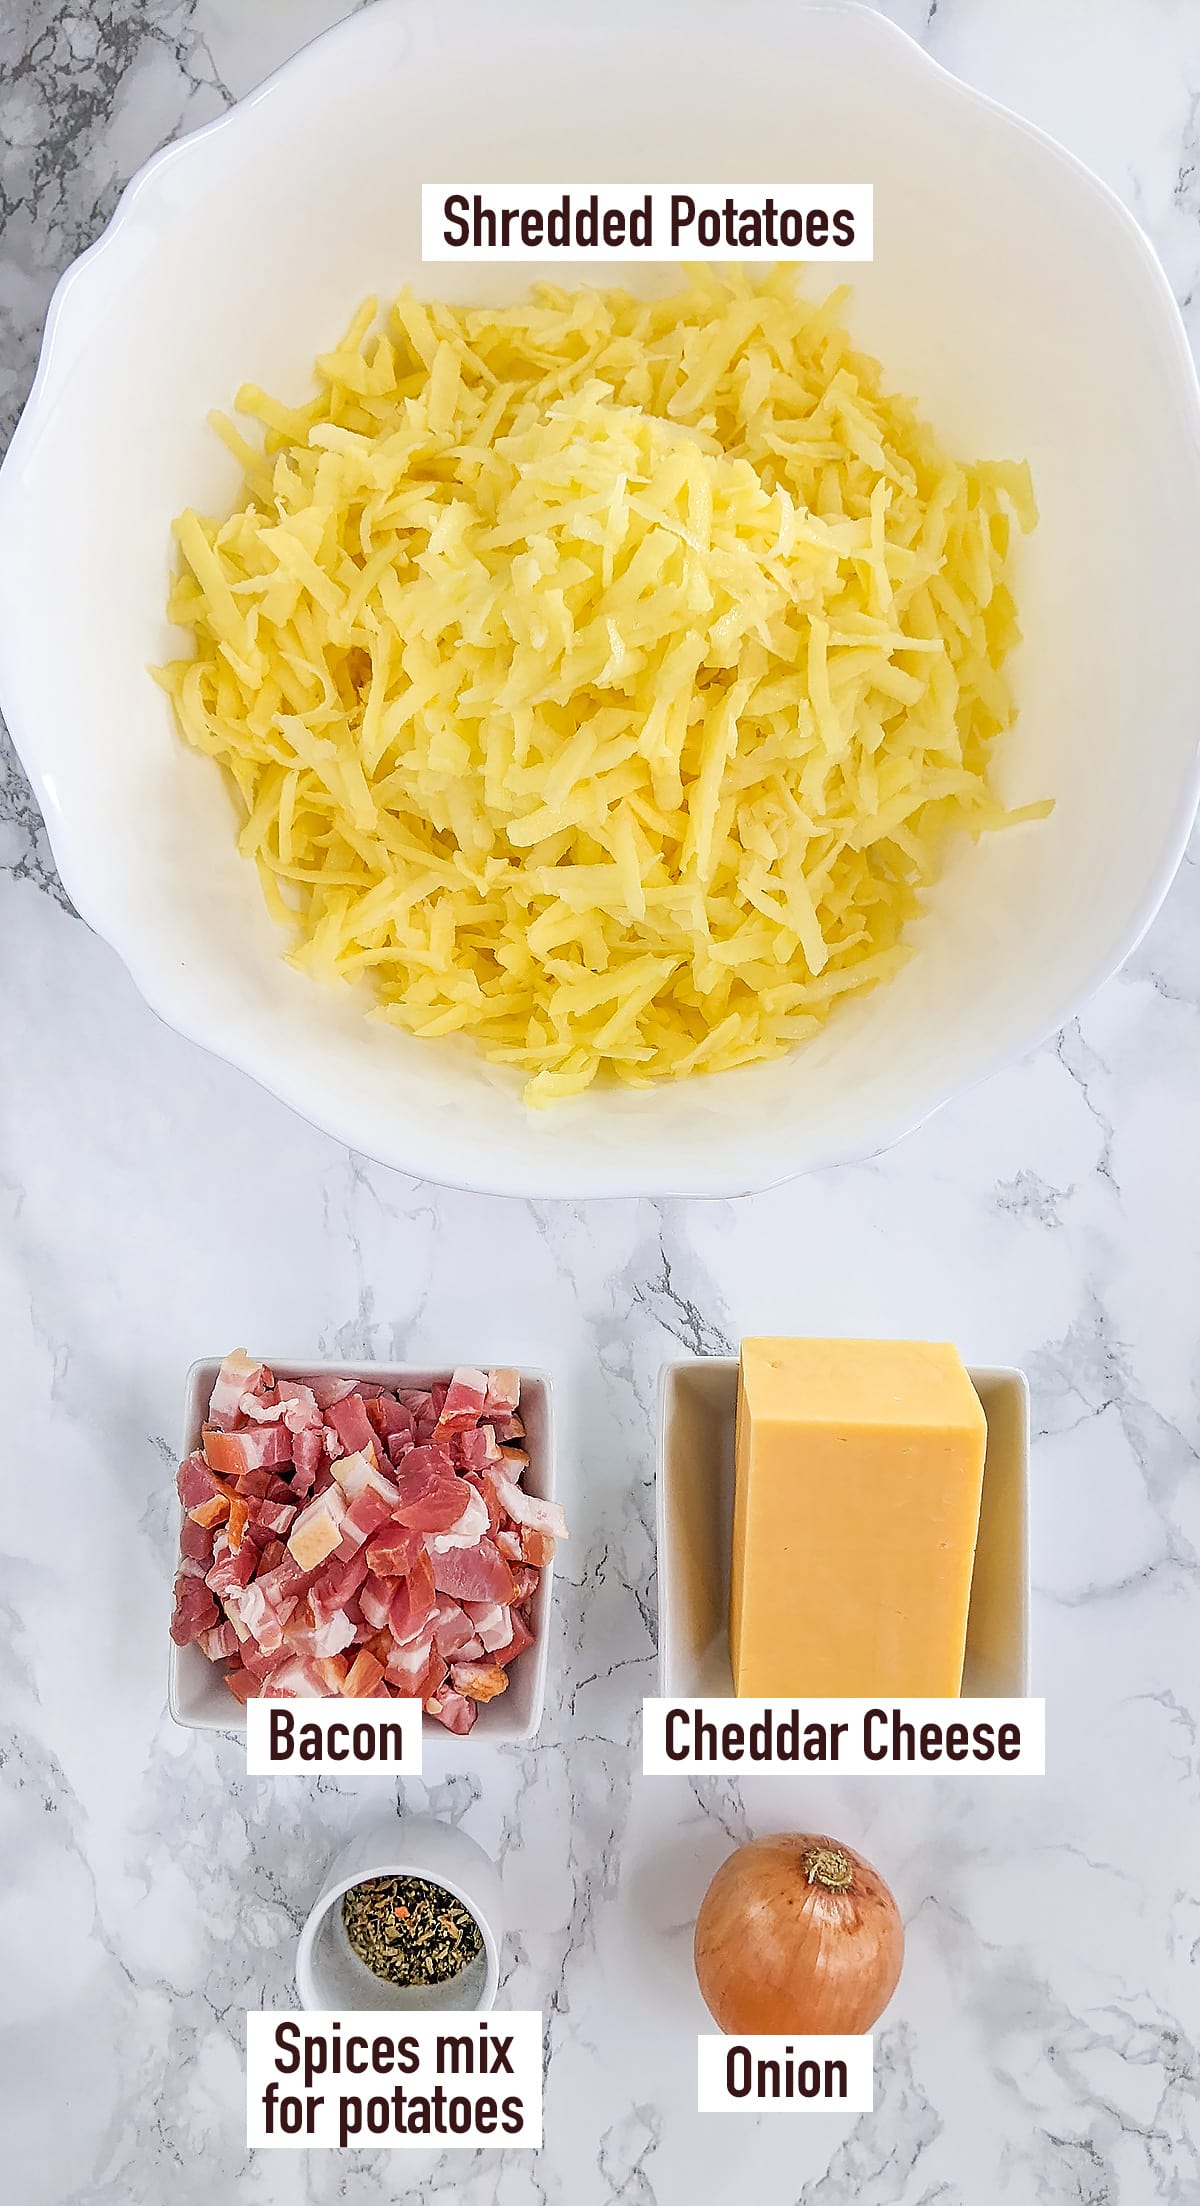 White plate with shredded potatoes, bacon, cheddar and onion.